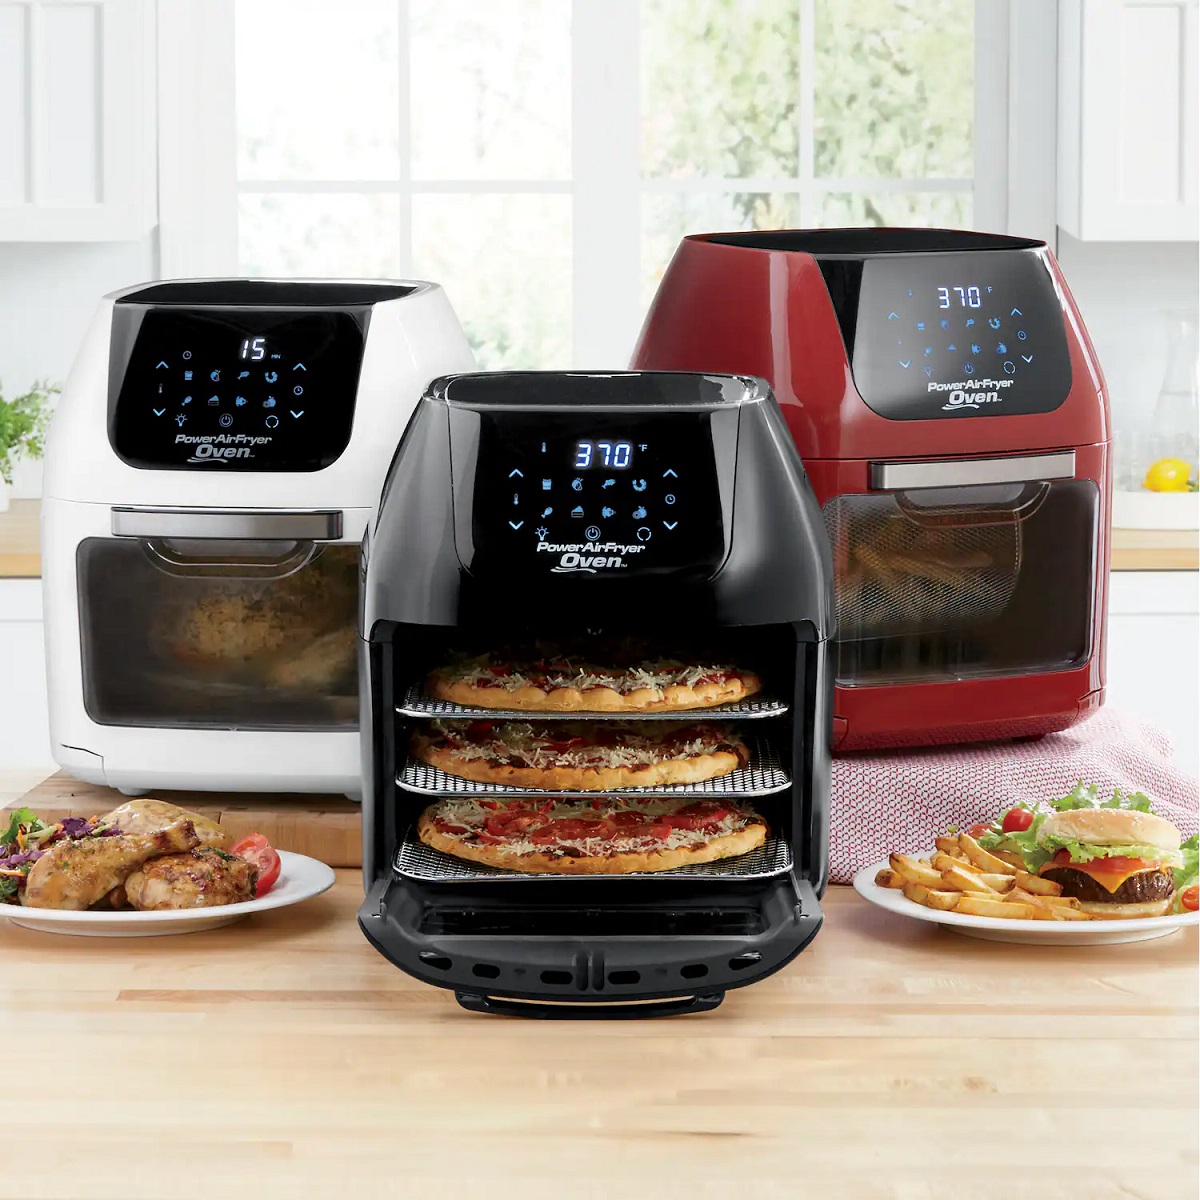 Emeril Lagasse Power Air Fryer Oven 360 - Special Edition - 9 in 1